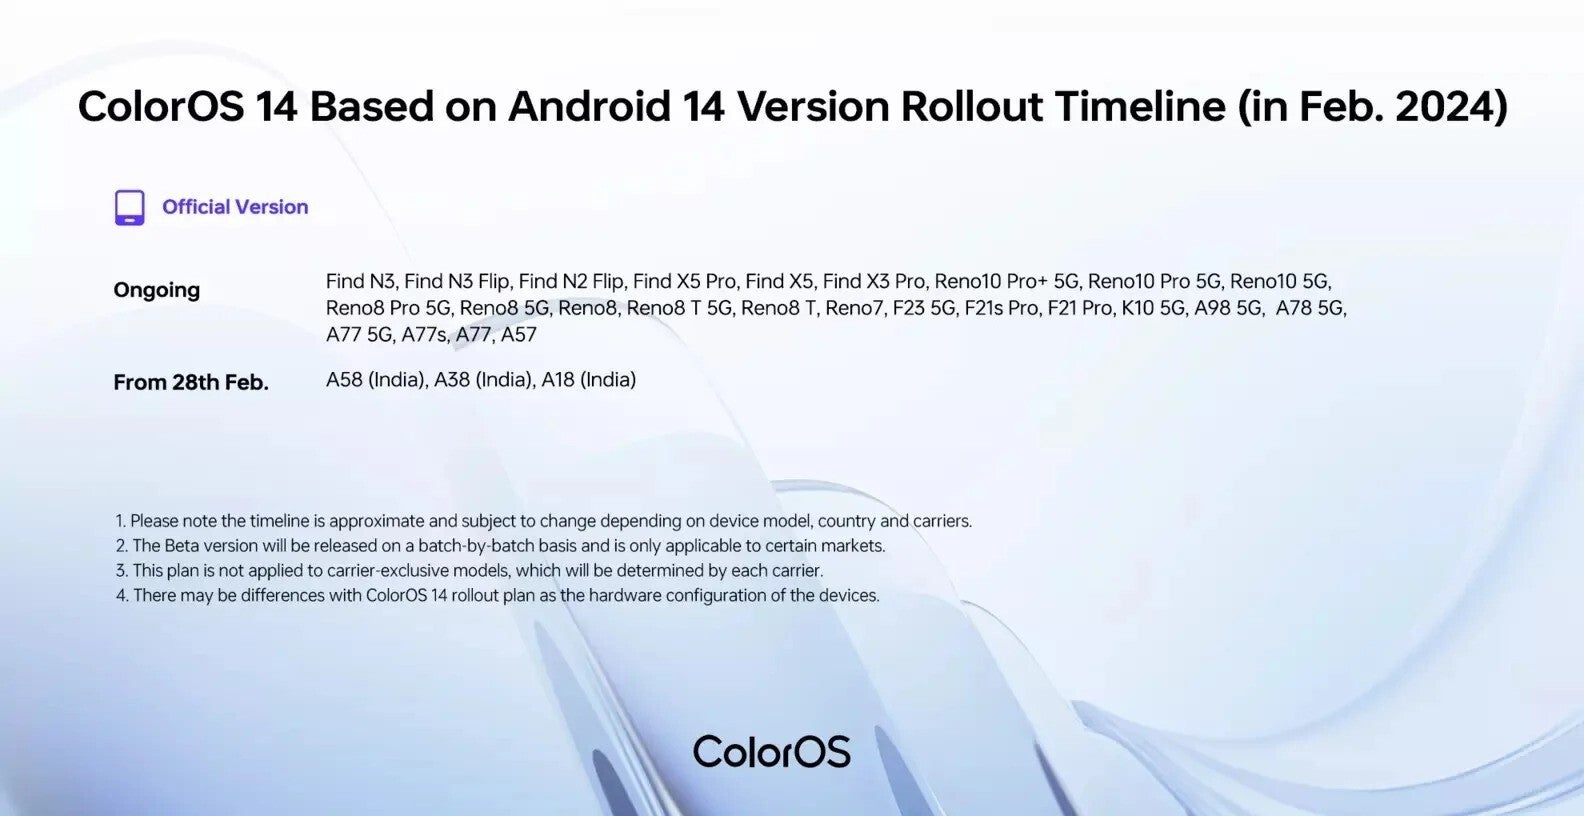 The full list of smartphones getting the update (Image Credit–Gizmochina) - Oppo rolls out Android 14-based ColorOS 14 to users globally: What devices are getting it?